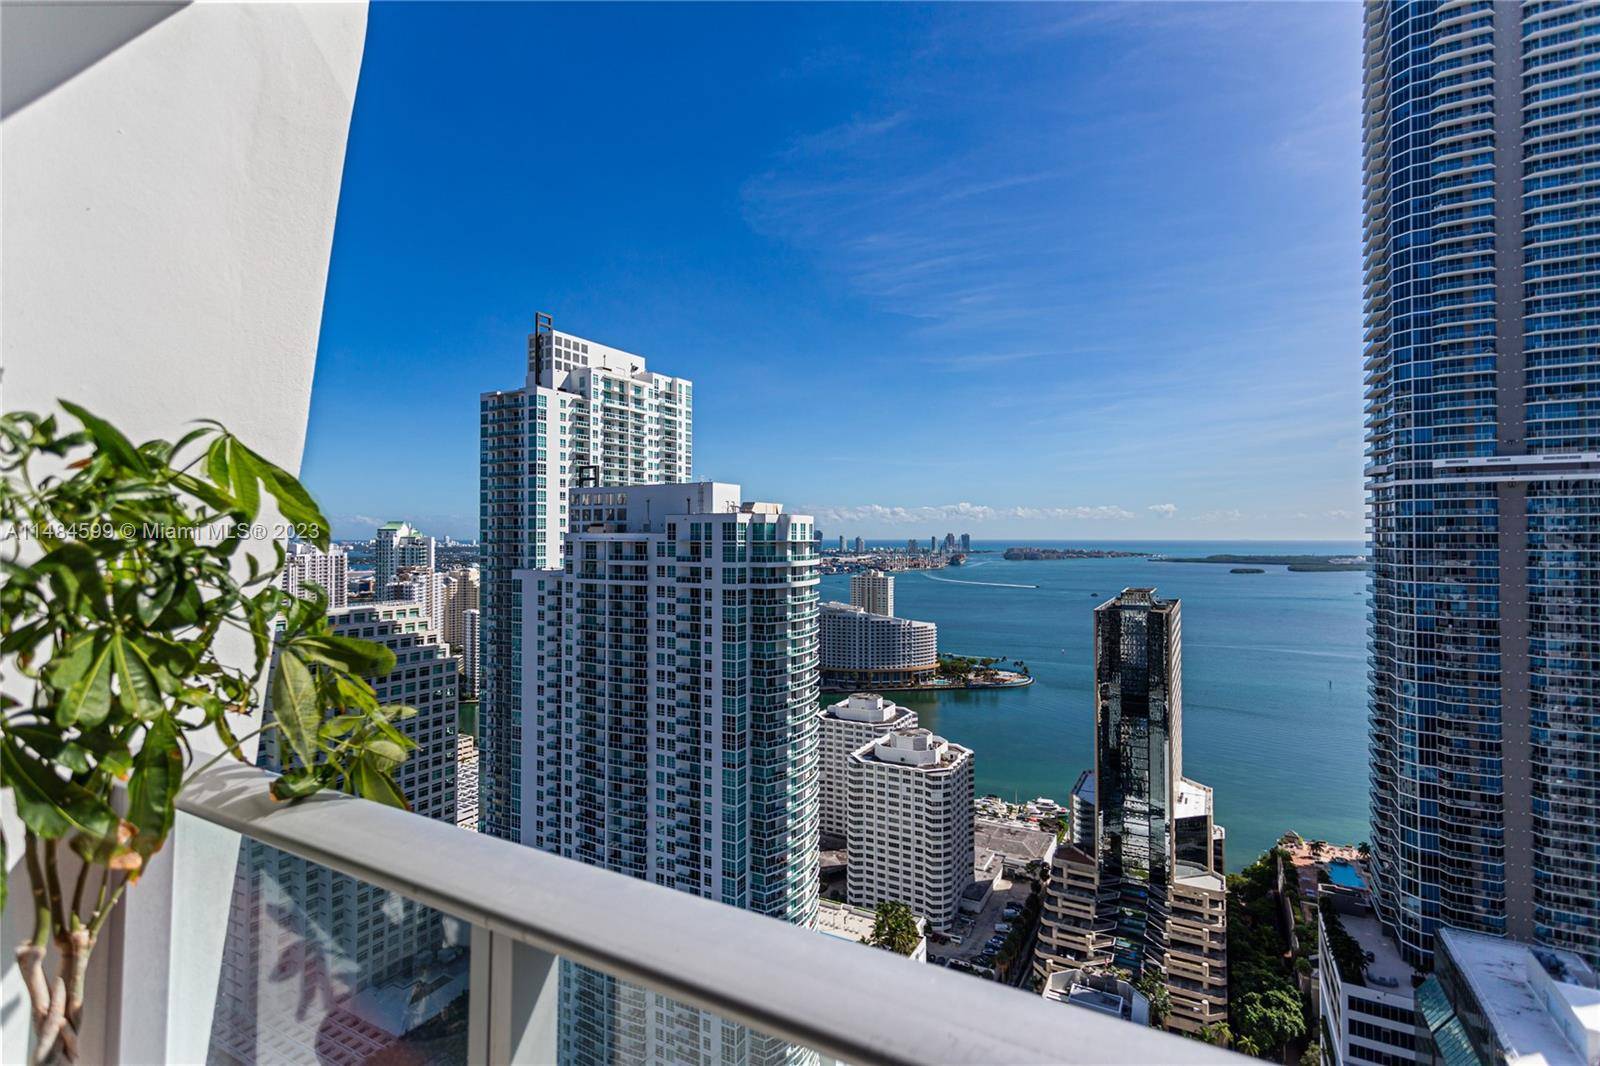 Discover the epitome of luxury living at 1010 Brickell.